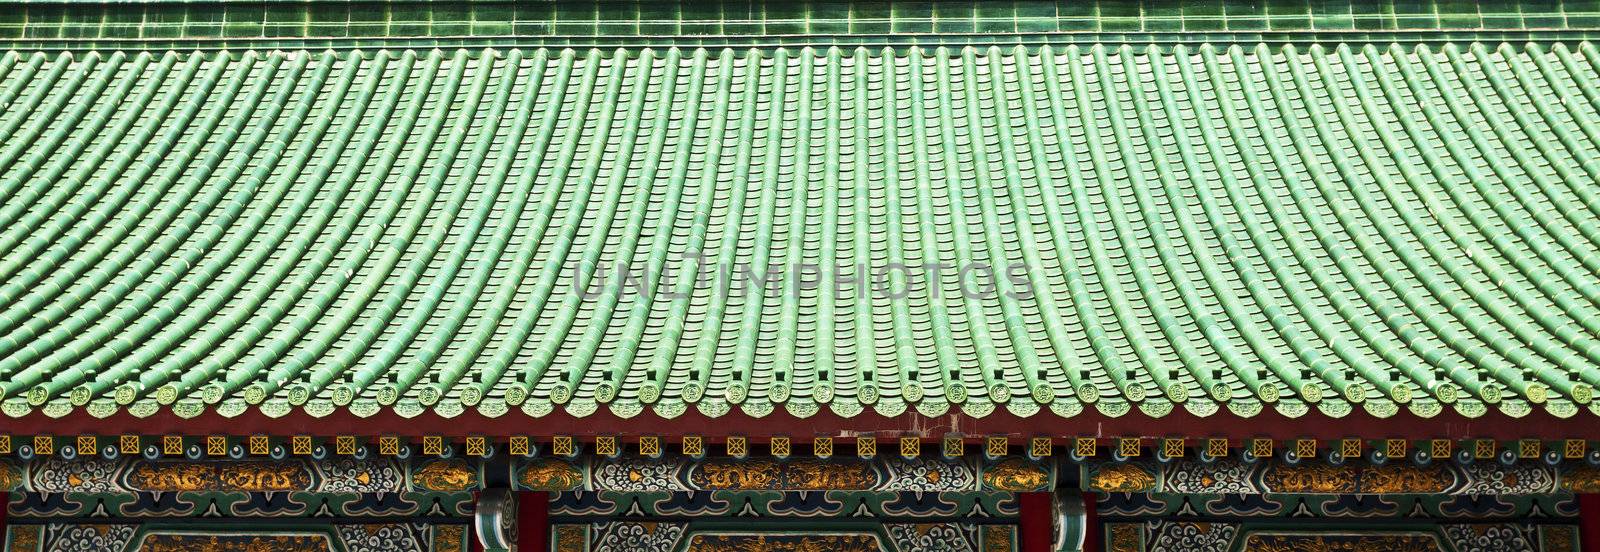 Temple roof pattern by kawing921